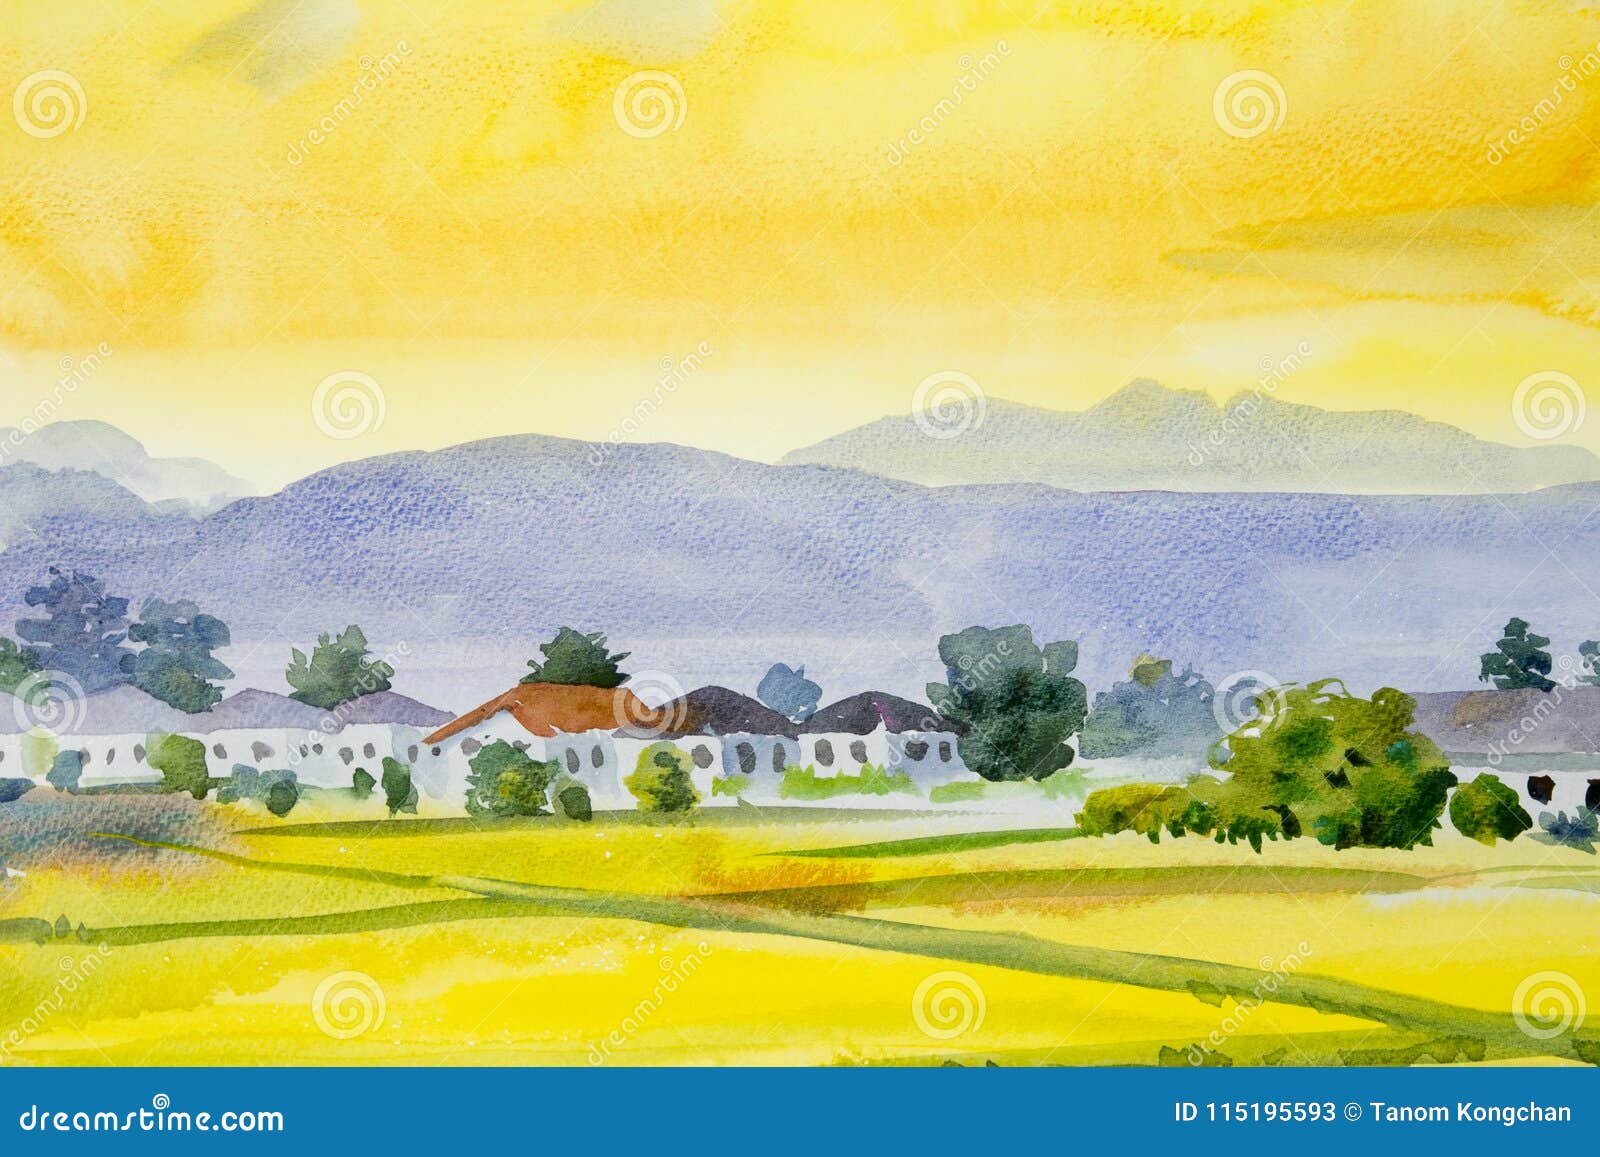 Painting Village and Rice Field in the Morning Stock Illustration 